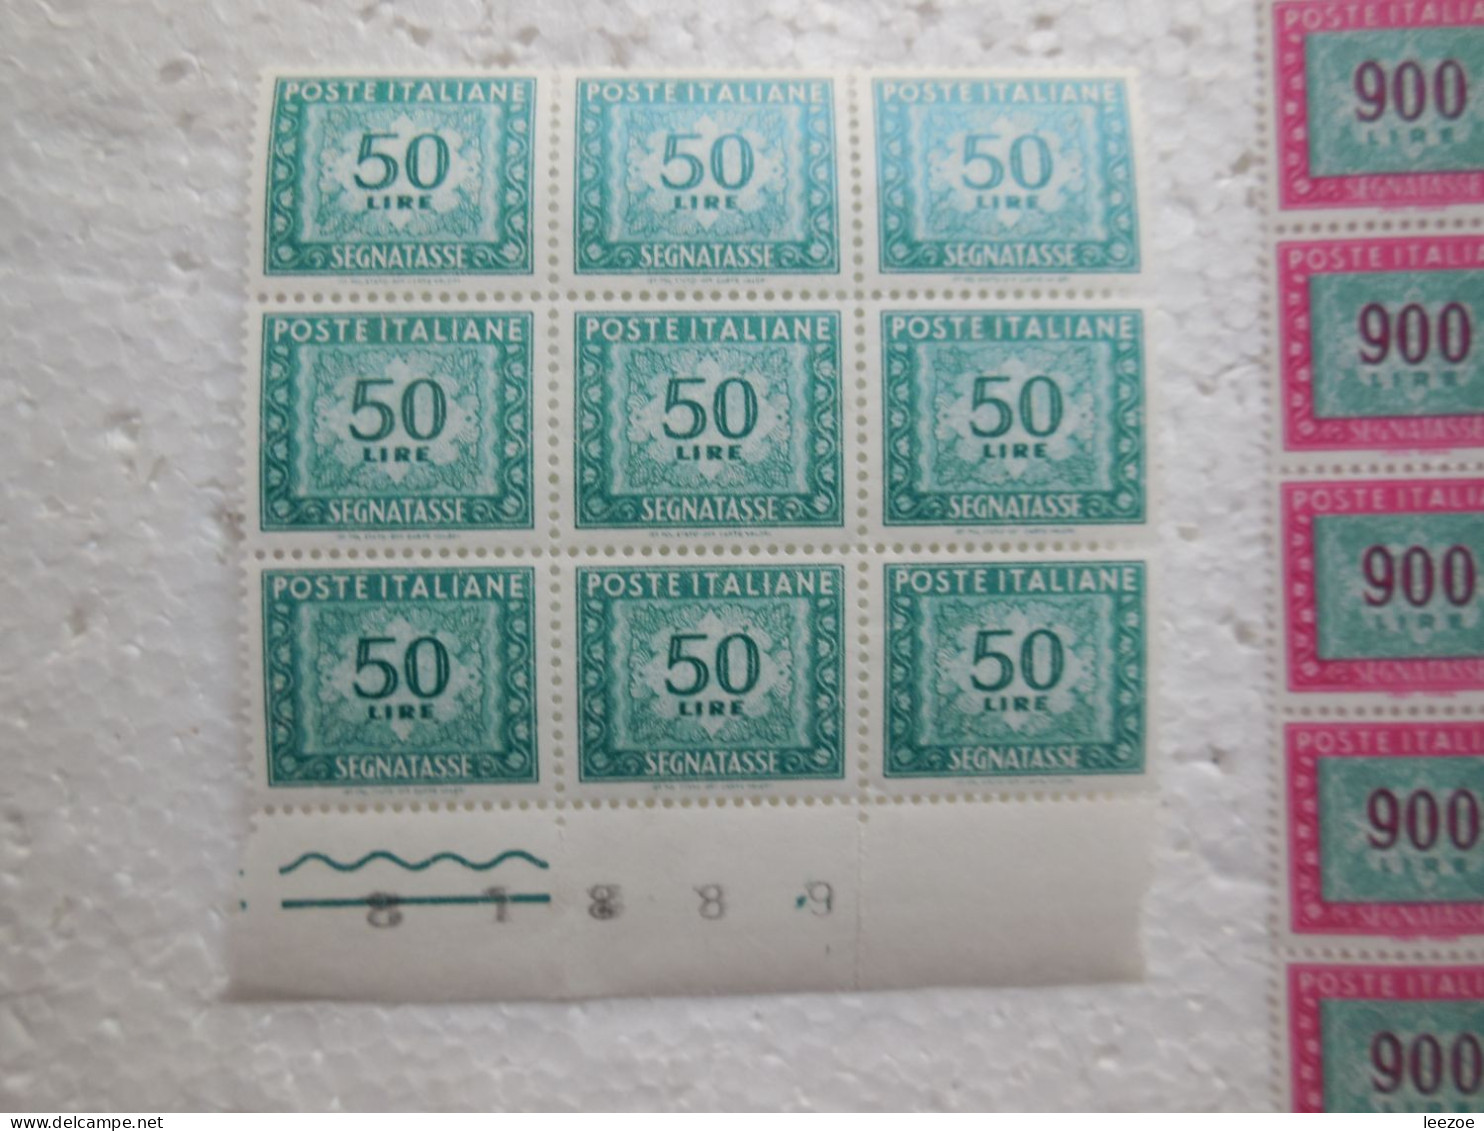 STAMP ITALIA SEGNATASSE, lot TIMBRES ITALIEN, timbres TAXES..  ...ref N5/40/8